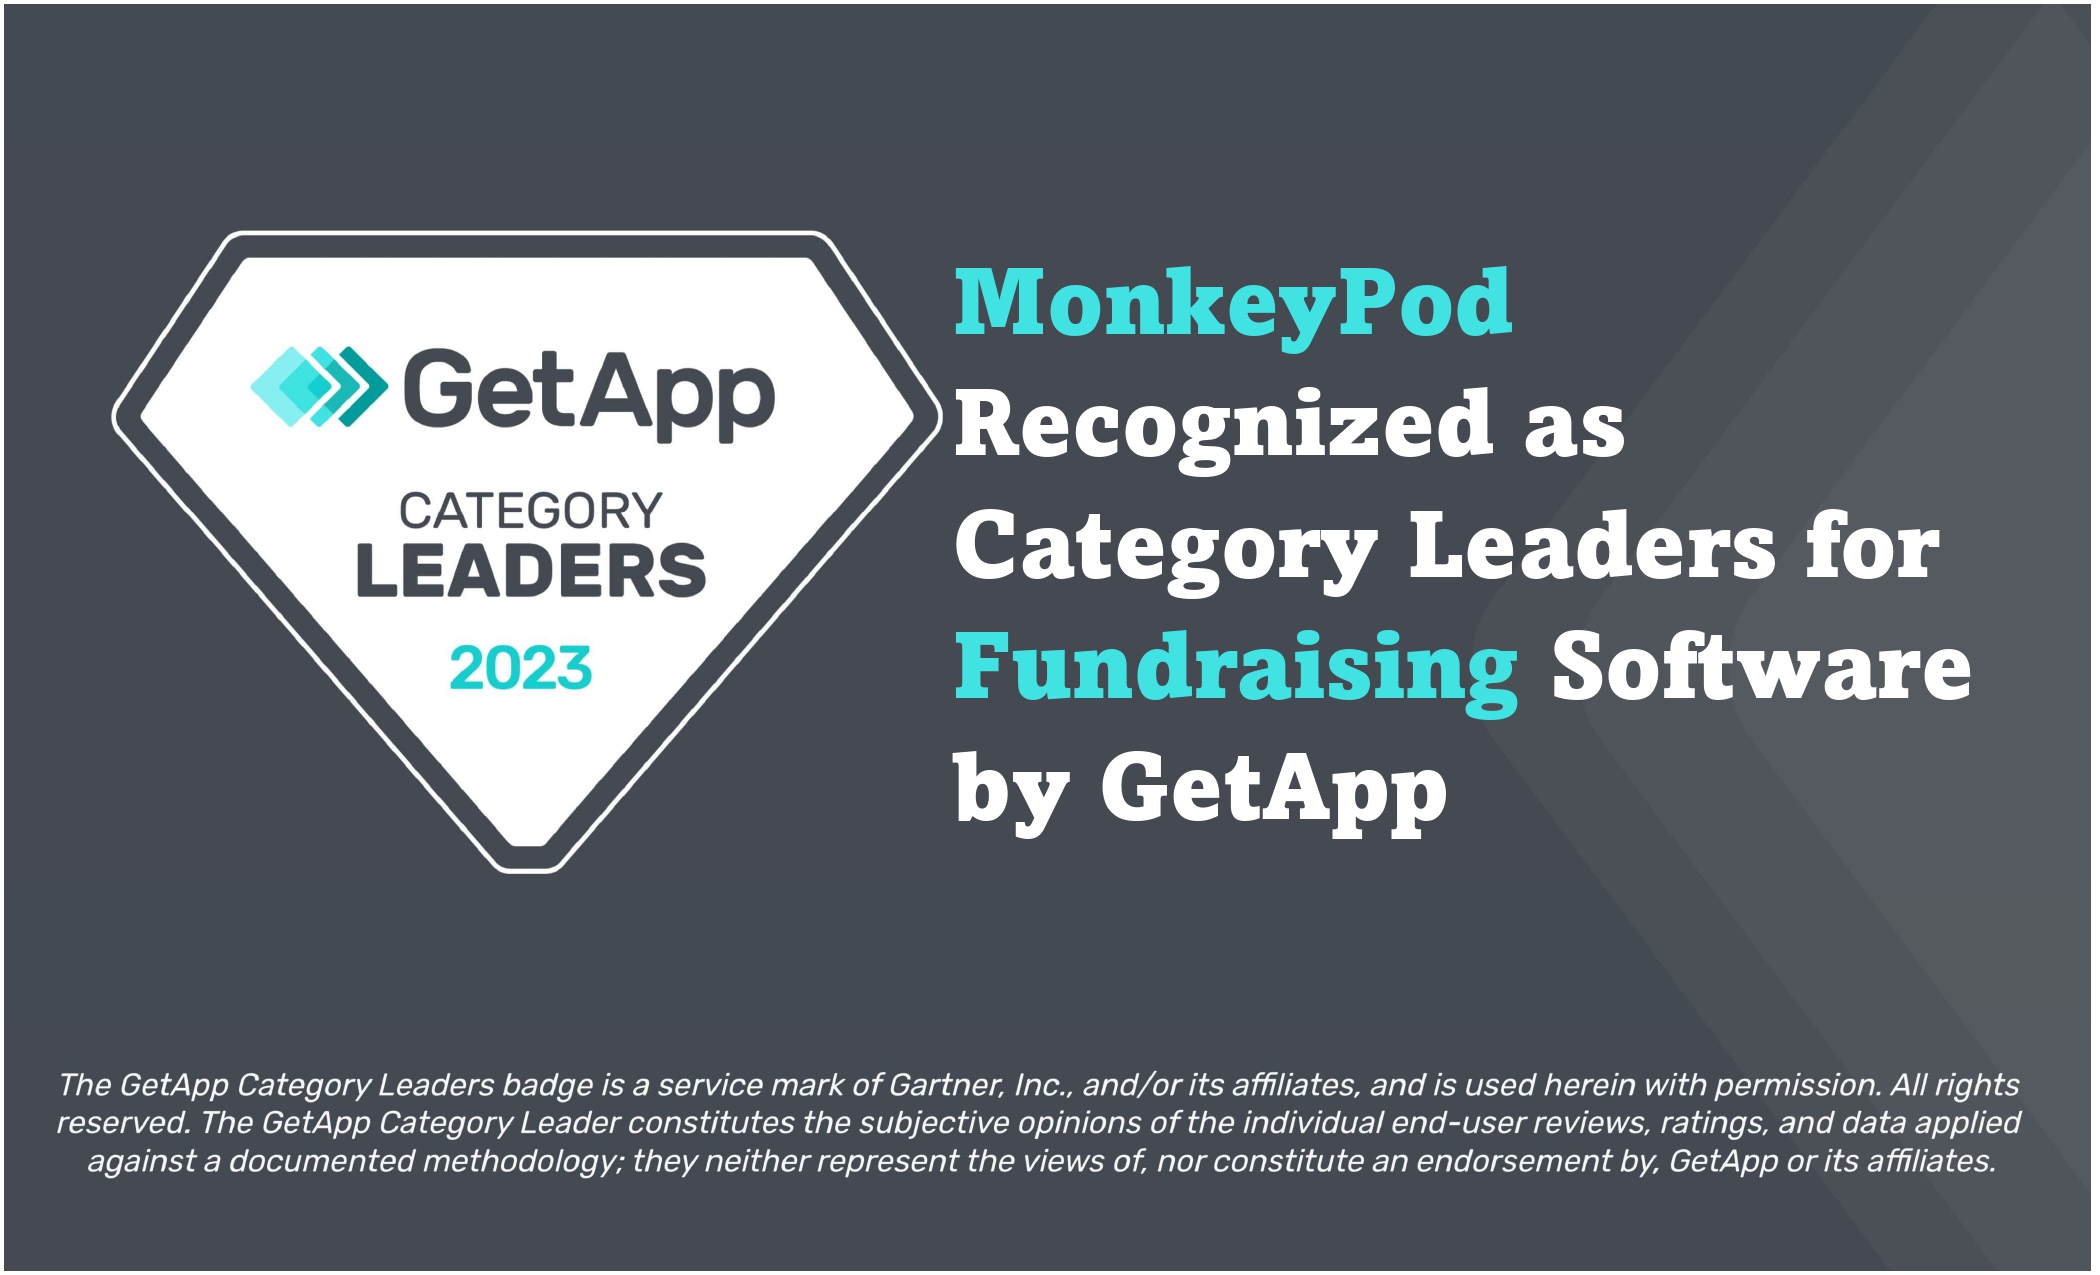 GetApp Category Leader for Fundraising Software